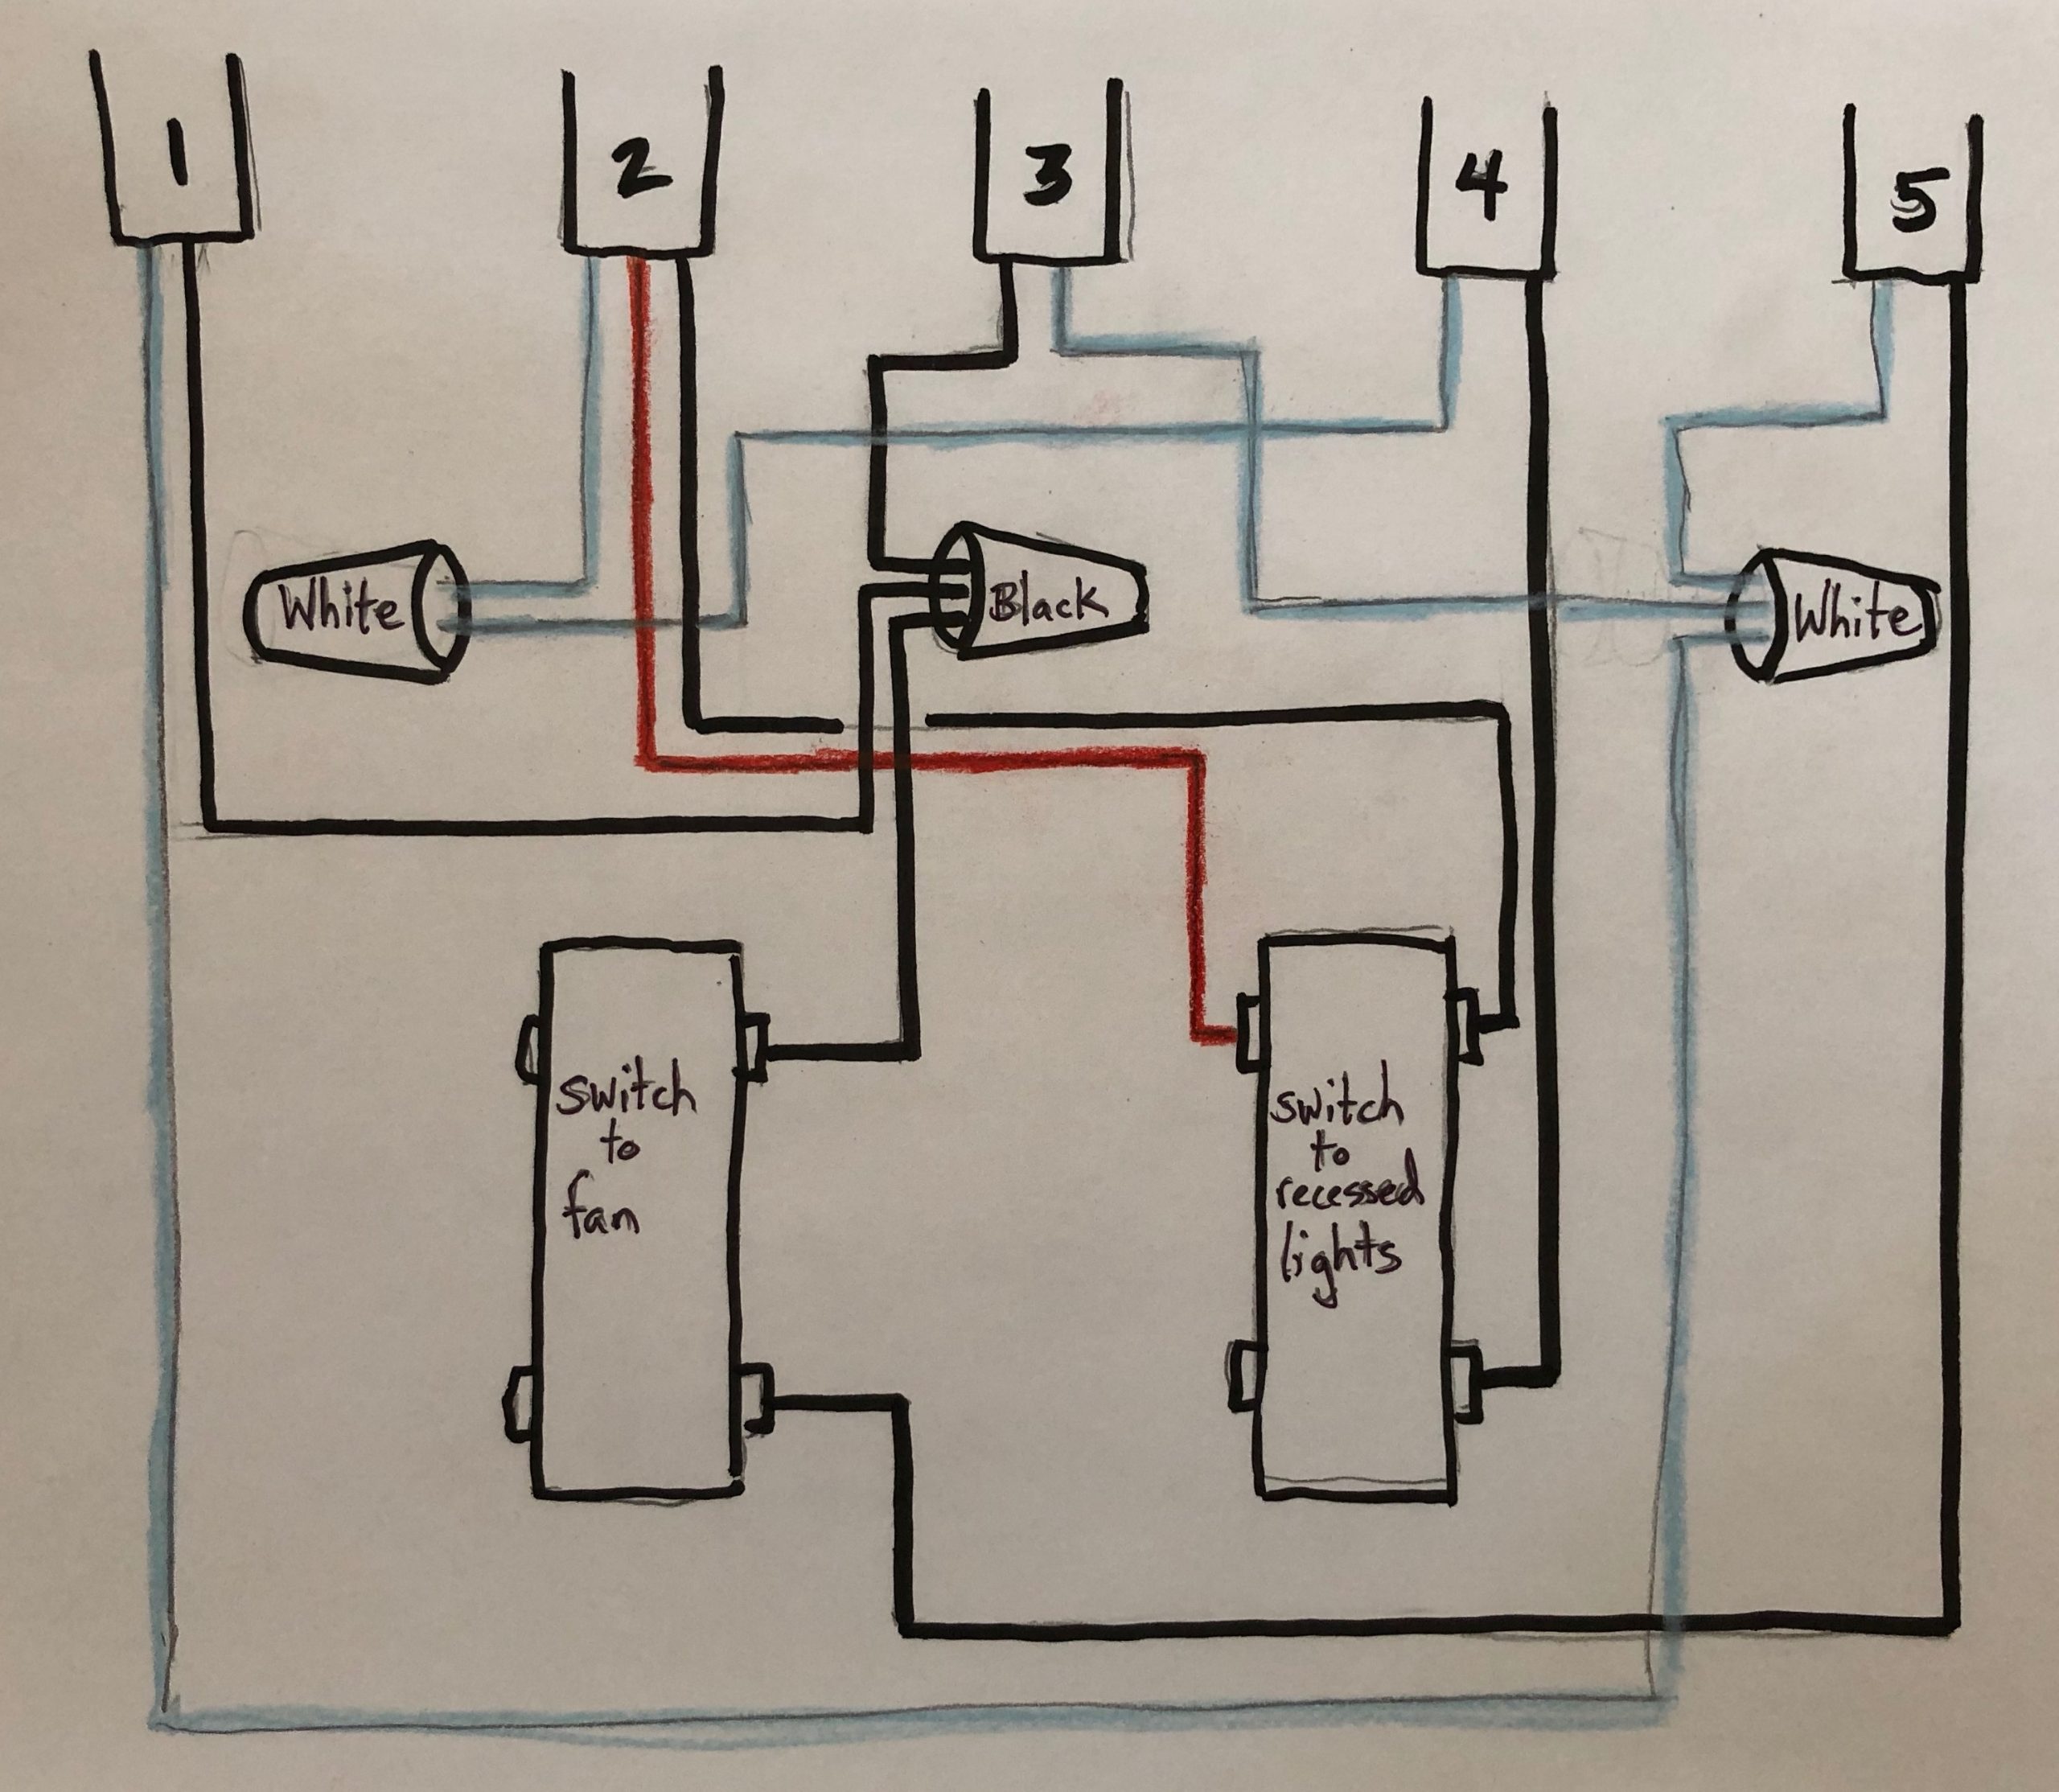 Replacing Bath Fan Switch With Timer Switch Home pertaining to measurements 2983 X 2596